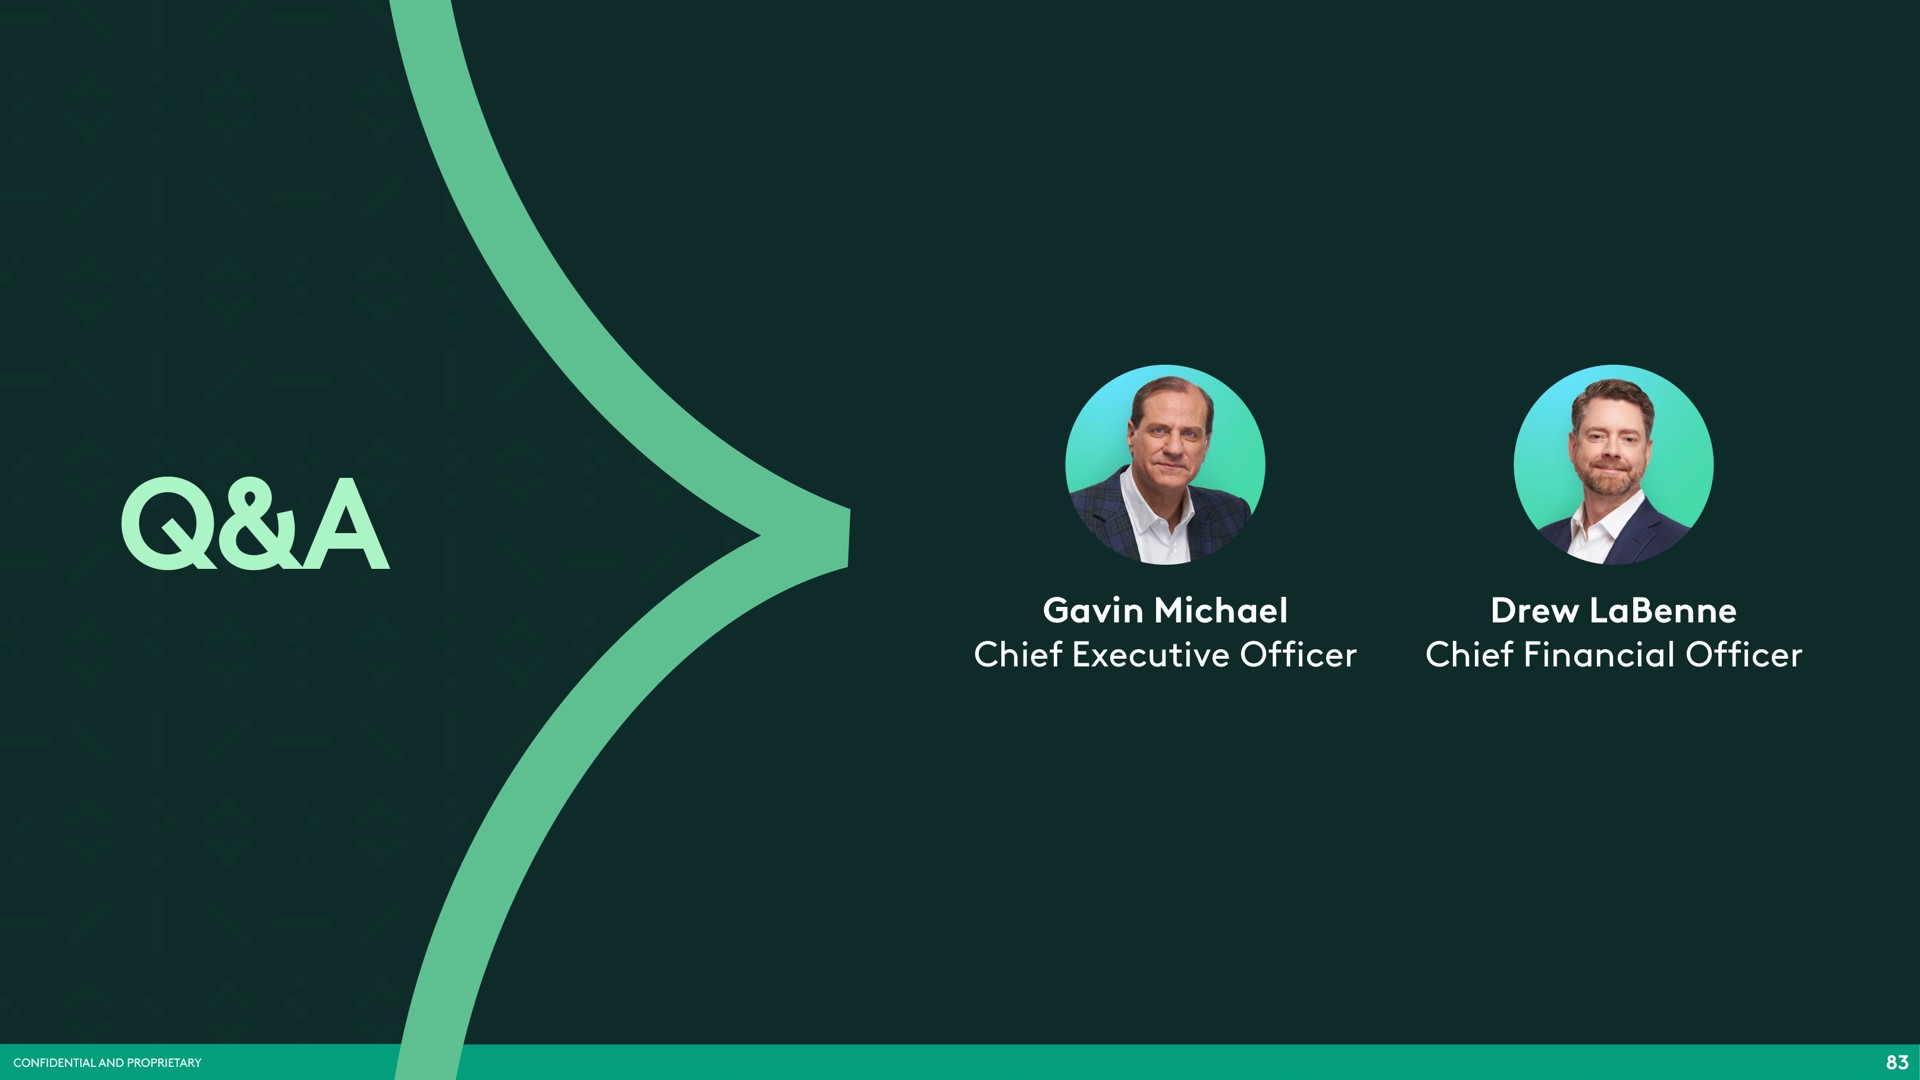 a chief executive officer drew chief financial officer | Bakkt